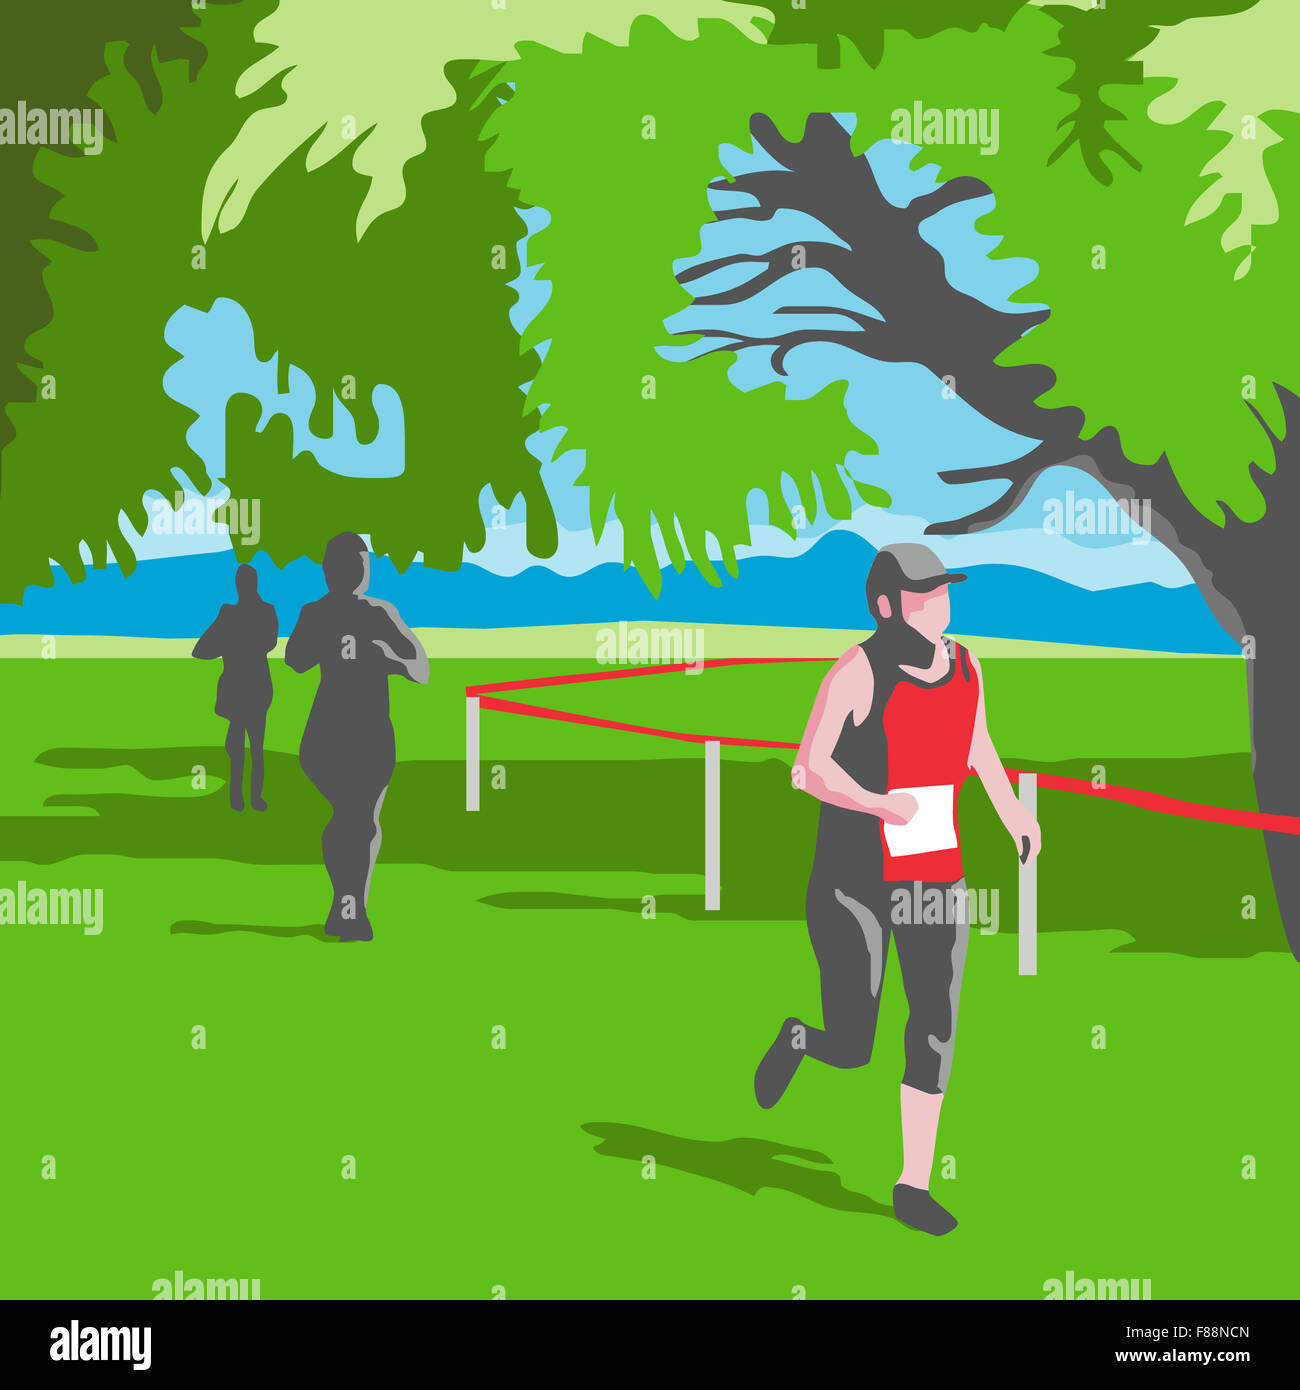 WPA style illustration of a marathon runner running with trees and other runners in the background done in retro style. Stock Photo